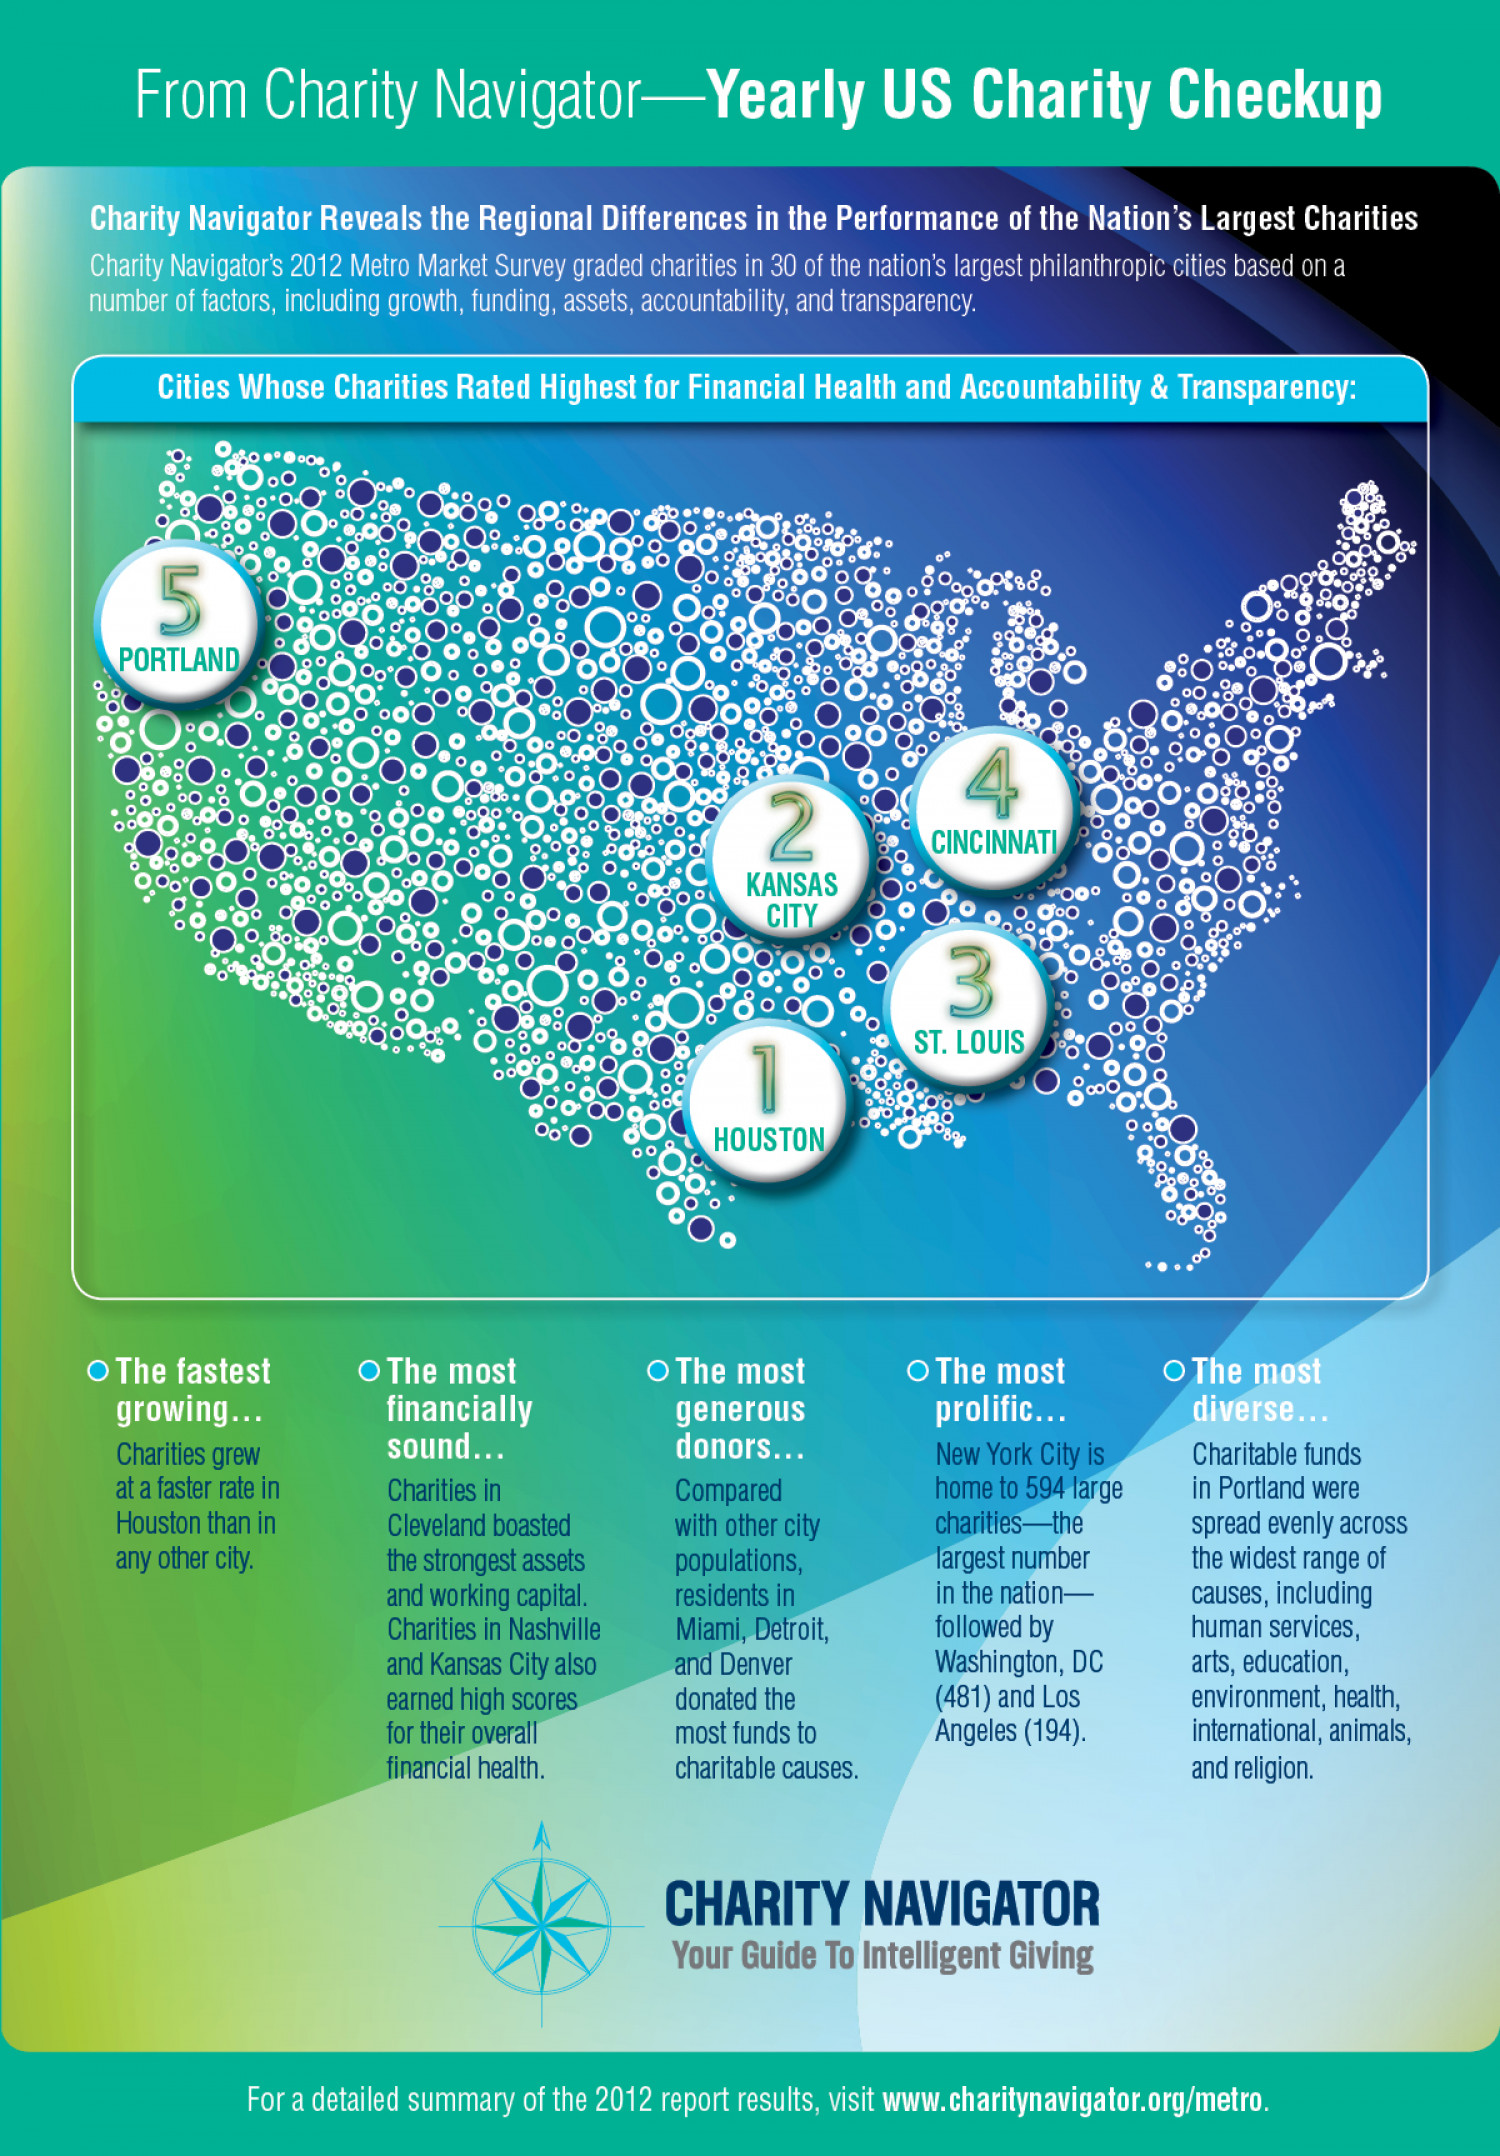 From Charity Navigator - Yearly US Charity Checkup Infographic